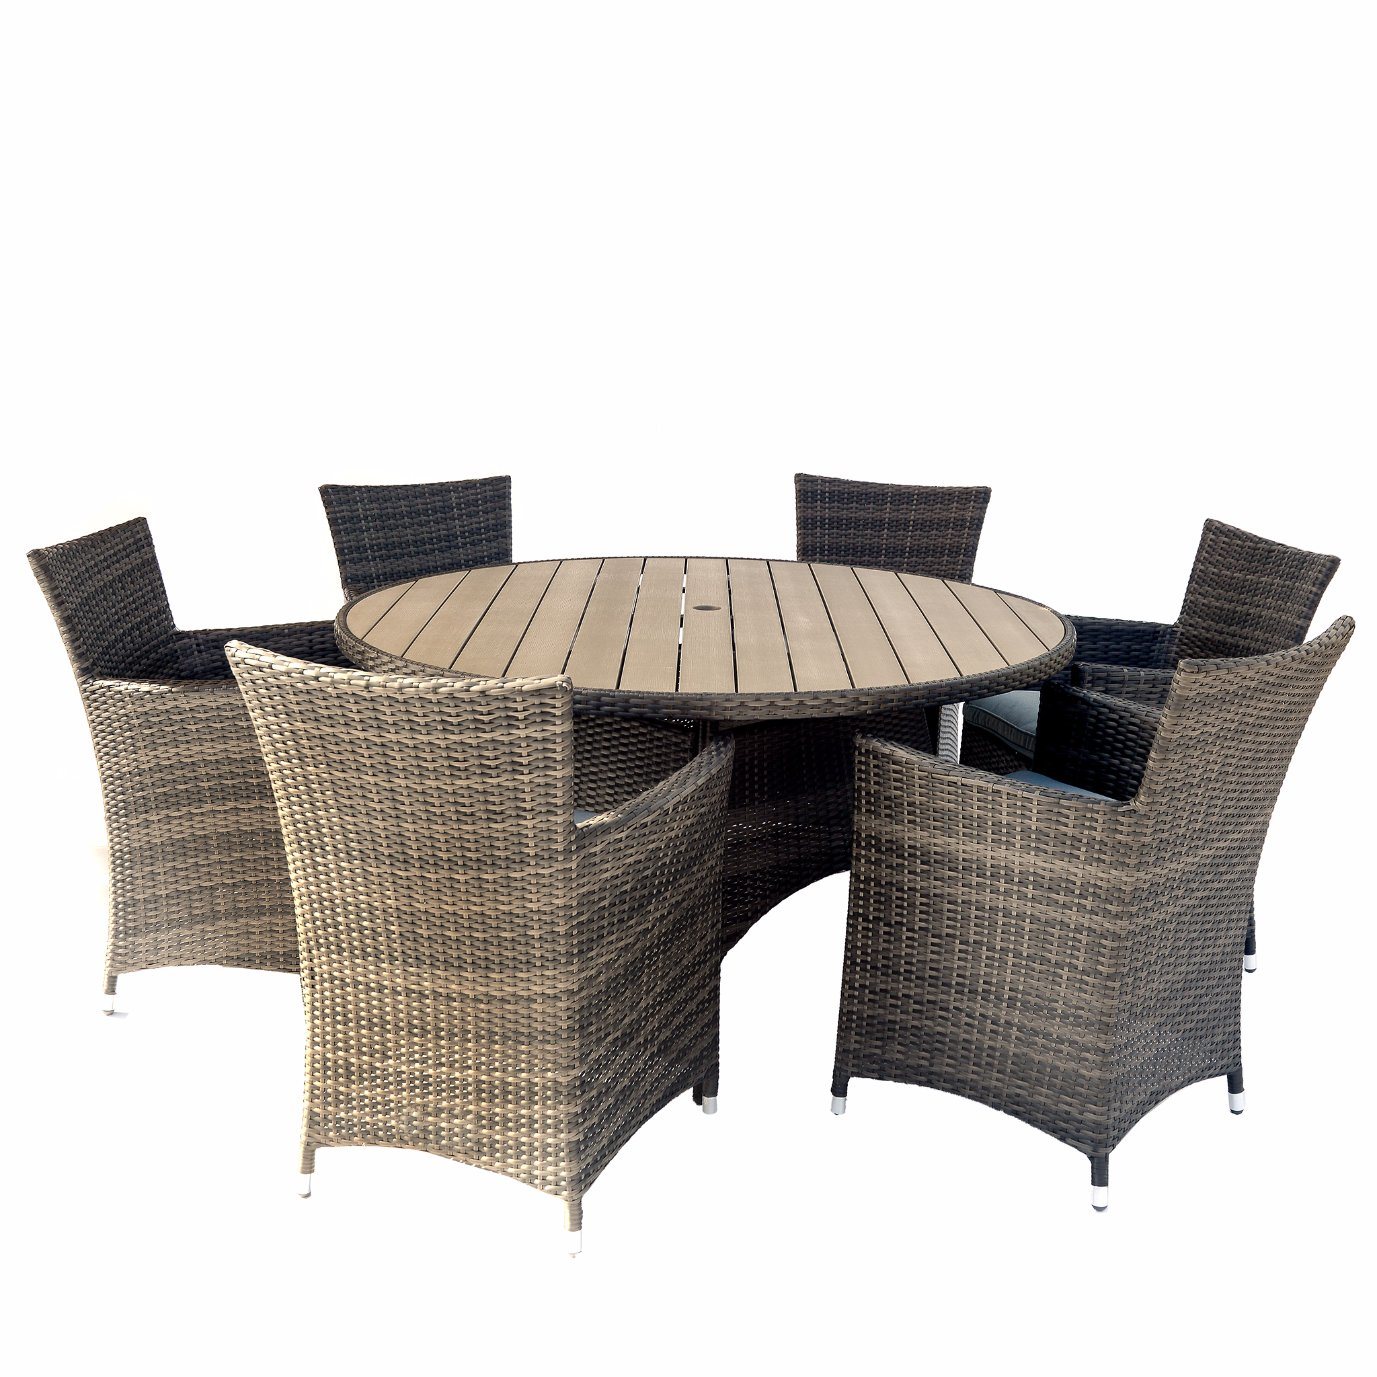 6-Seater Garden Outdoor Furniture Dining Table Set Wf050013